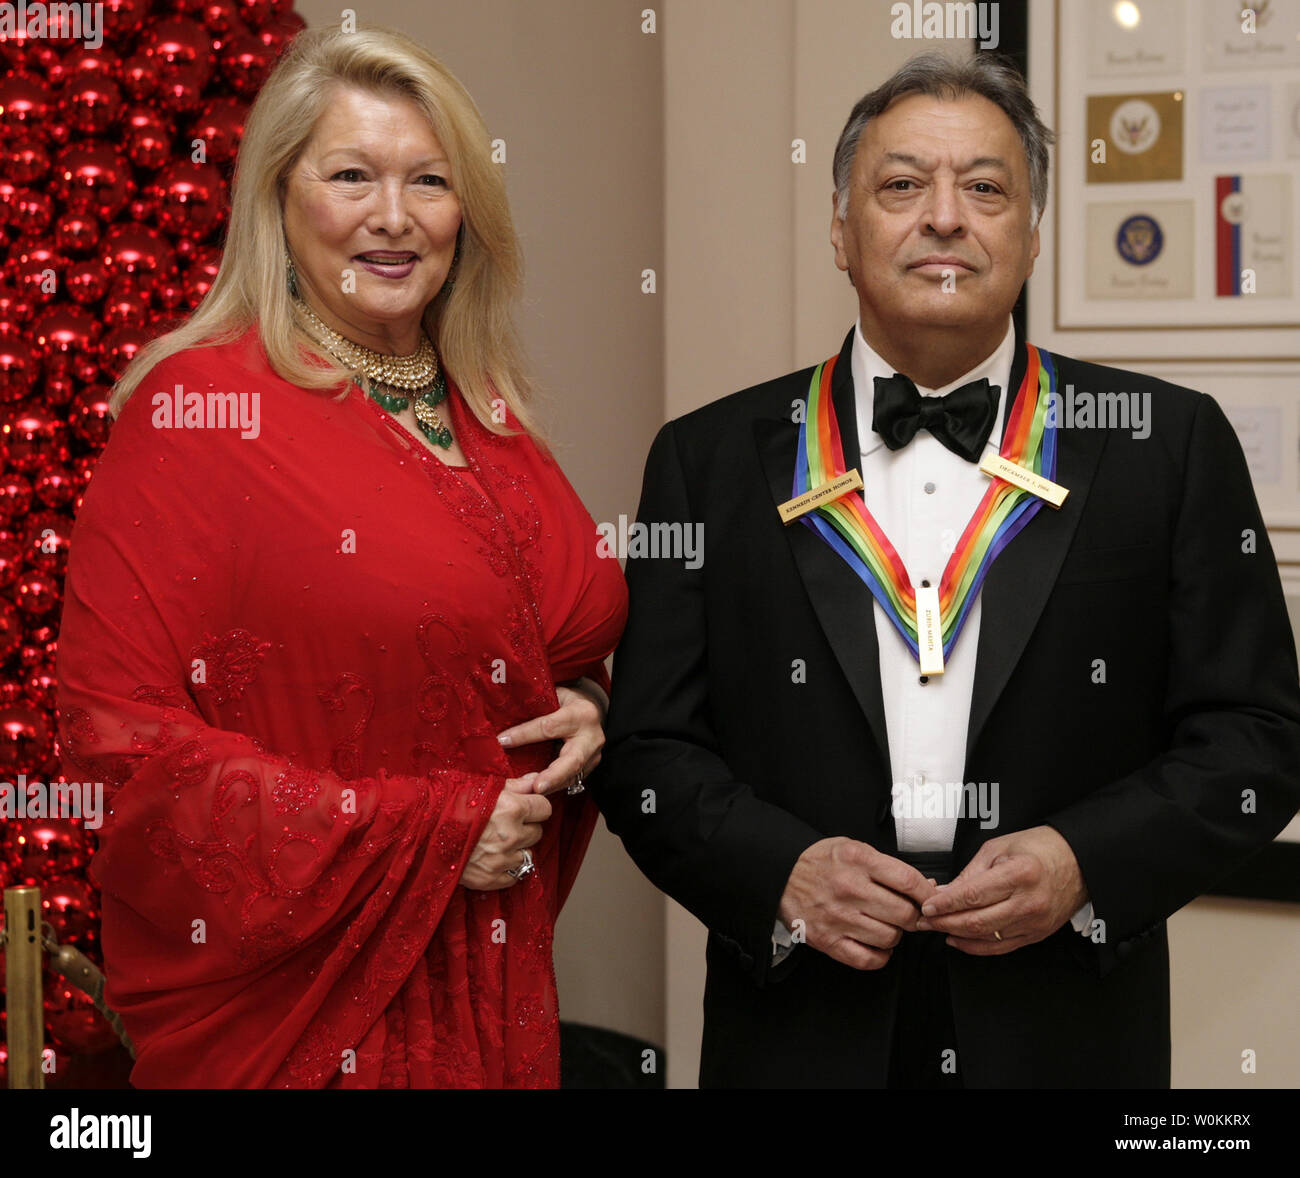 Conductor and Kennedy Center Honoree Zubin Mehta and his wife Nancy, arrive at the White House for the Kennedy Center Honors in Washington on December 3, 2006. (UPI Photo/Yuri Gripas) Stock Photo